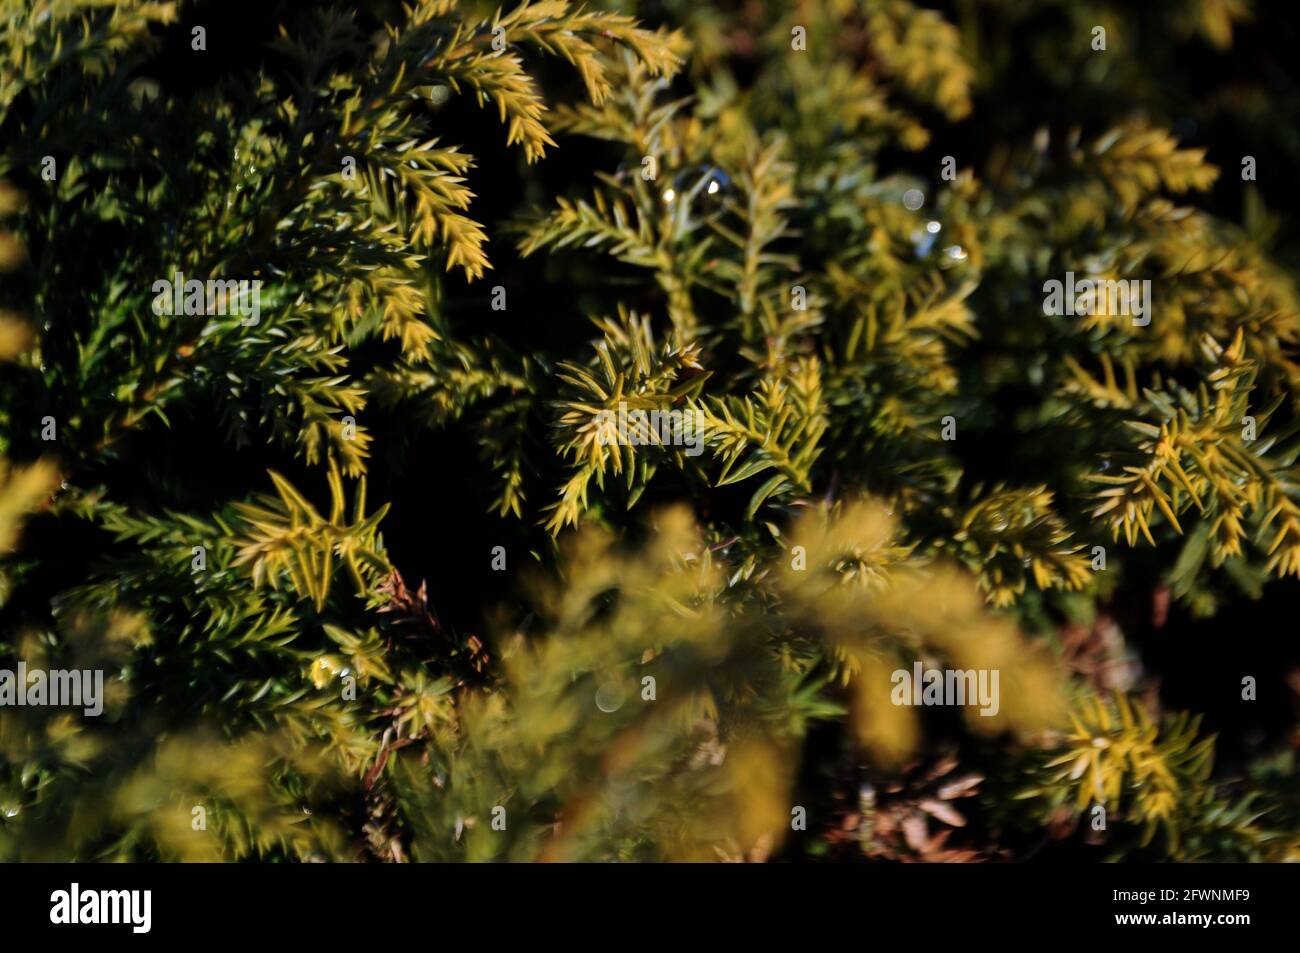 Green abstract winter bush background Stock Photo